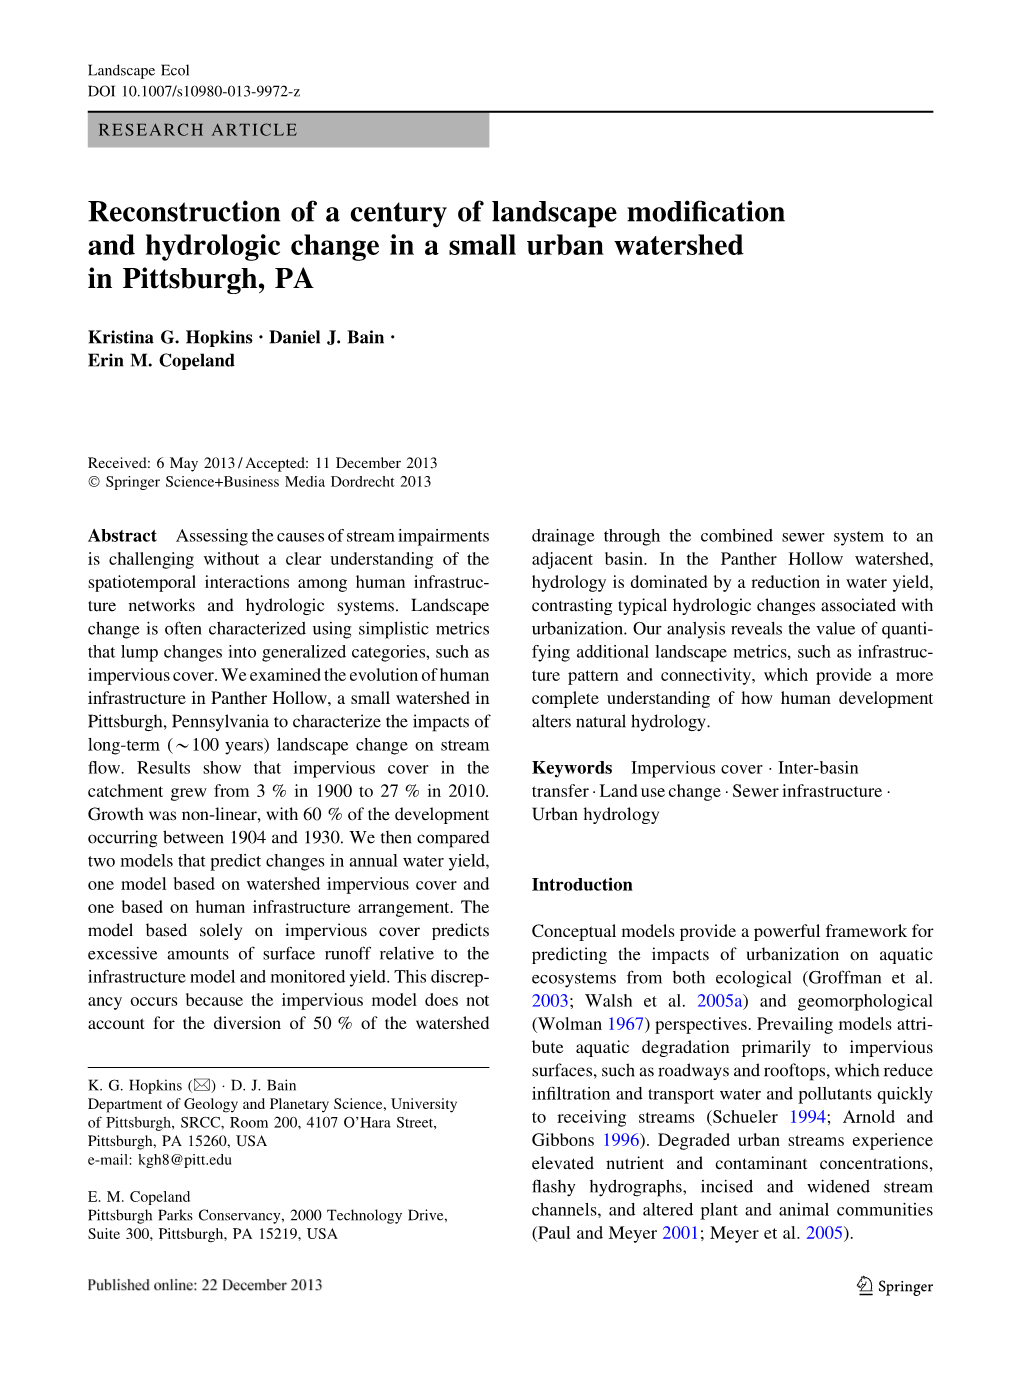 Reconstruction of a Century of Landscape Modification And